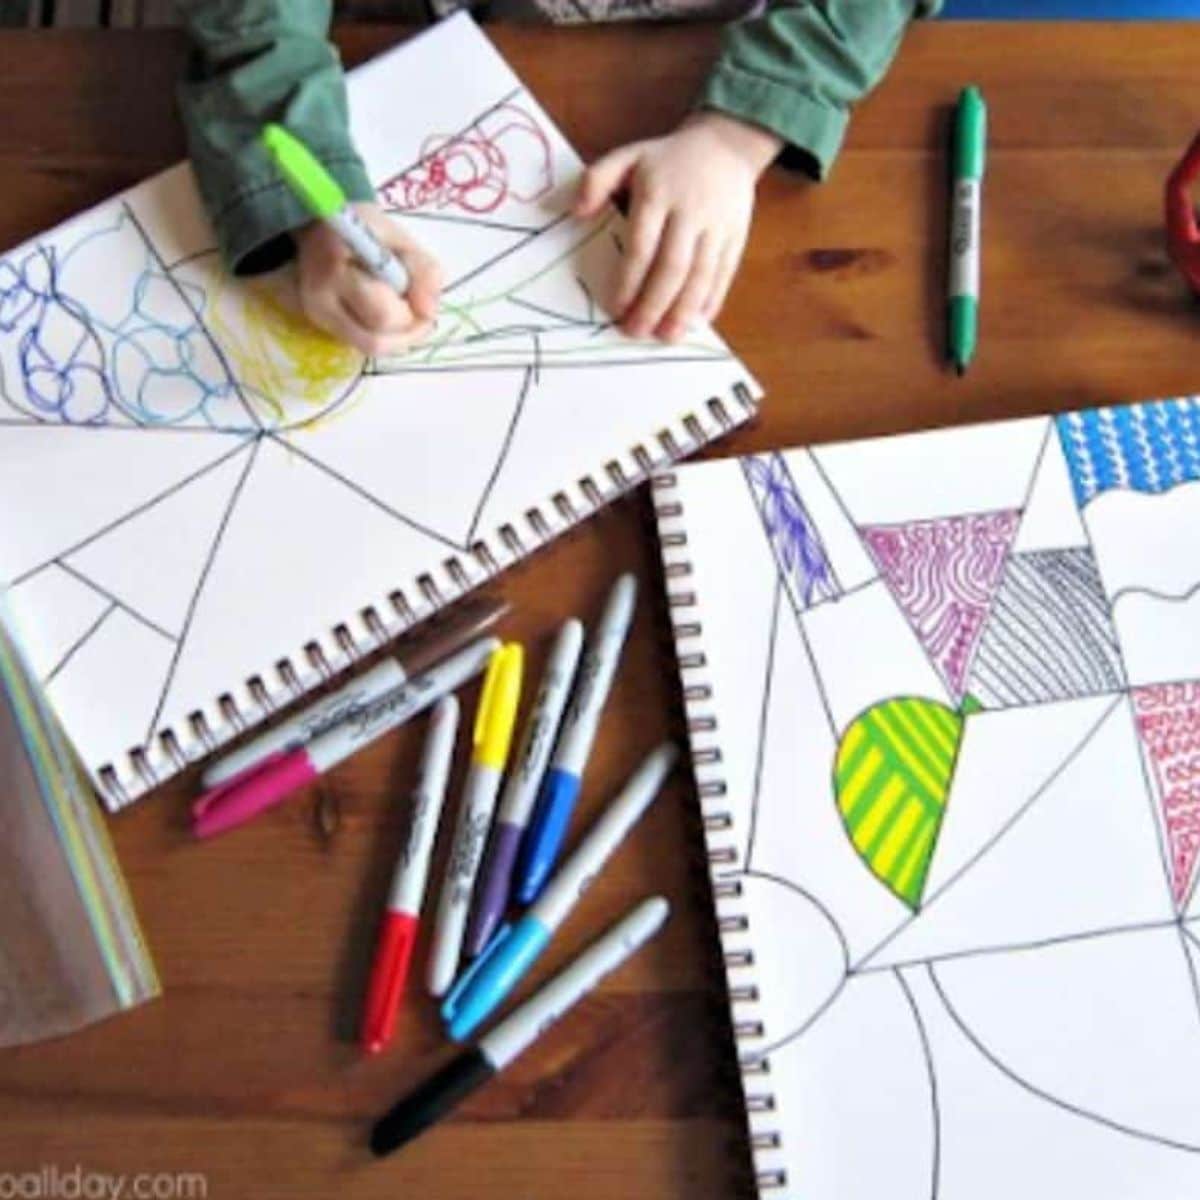 Easy Drawing Ideas - Our Own Collection of Drawing Inspirations